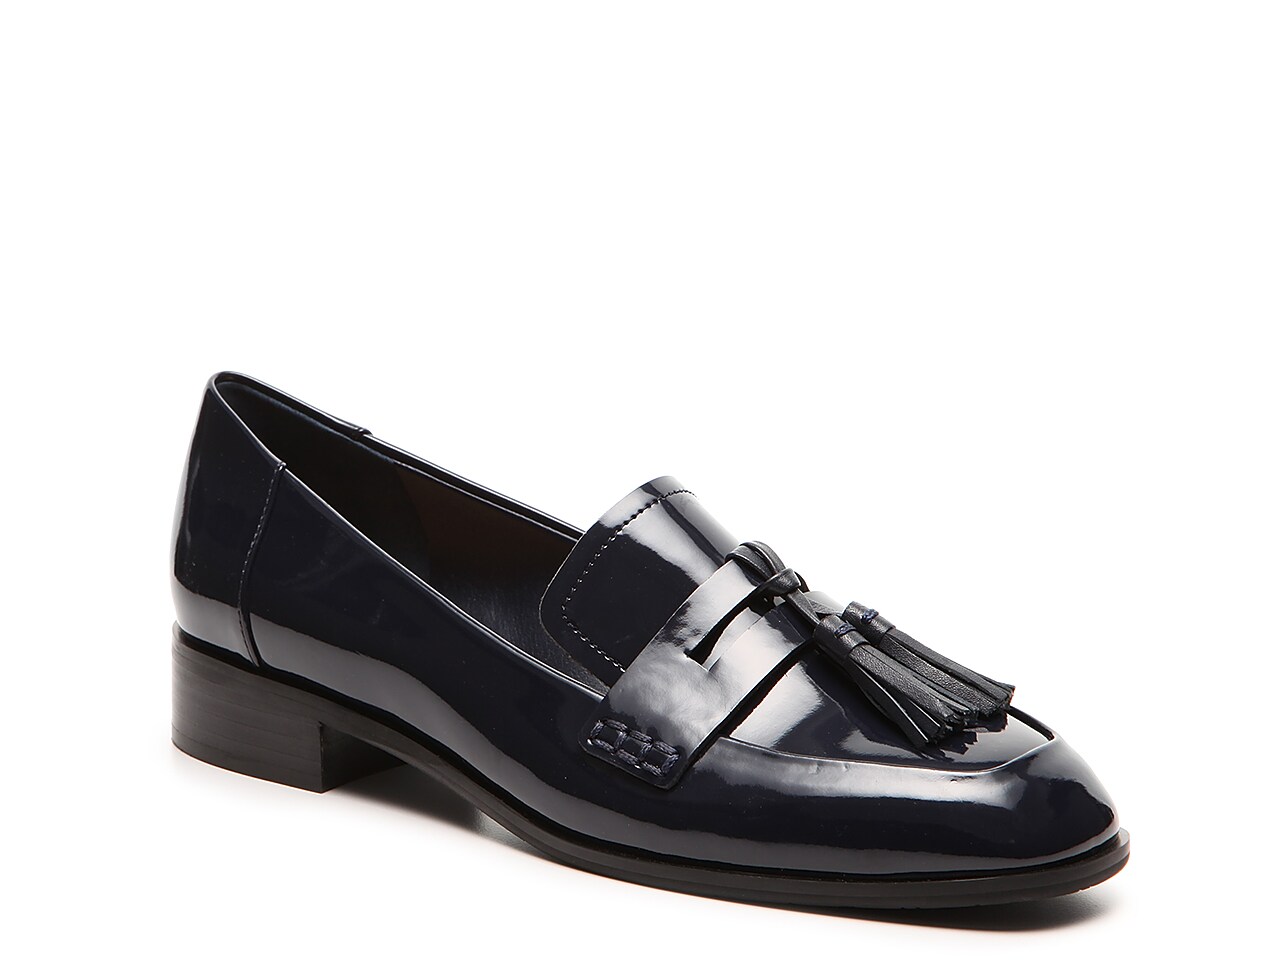 Tahari Tina Loafer Women's Shoes | DSW